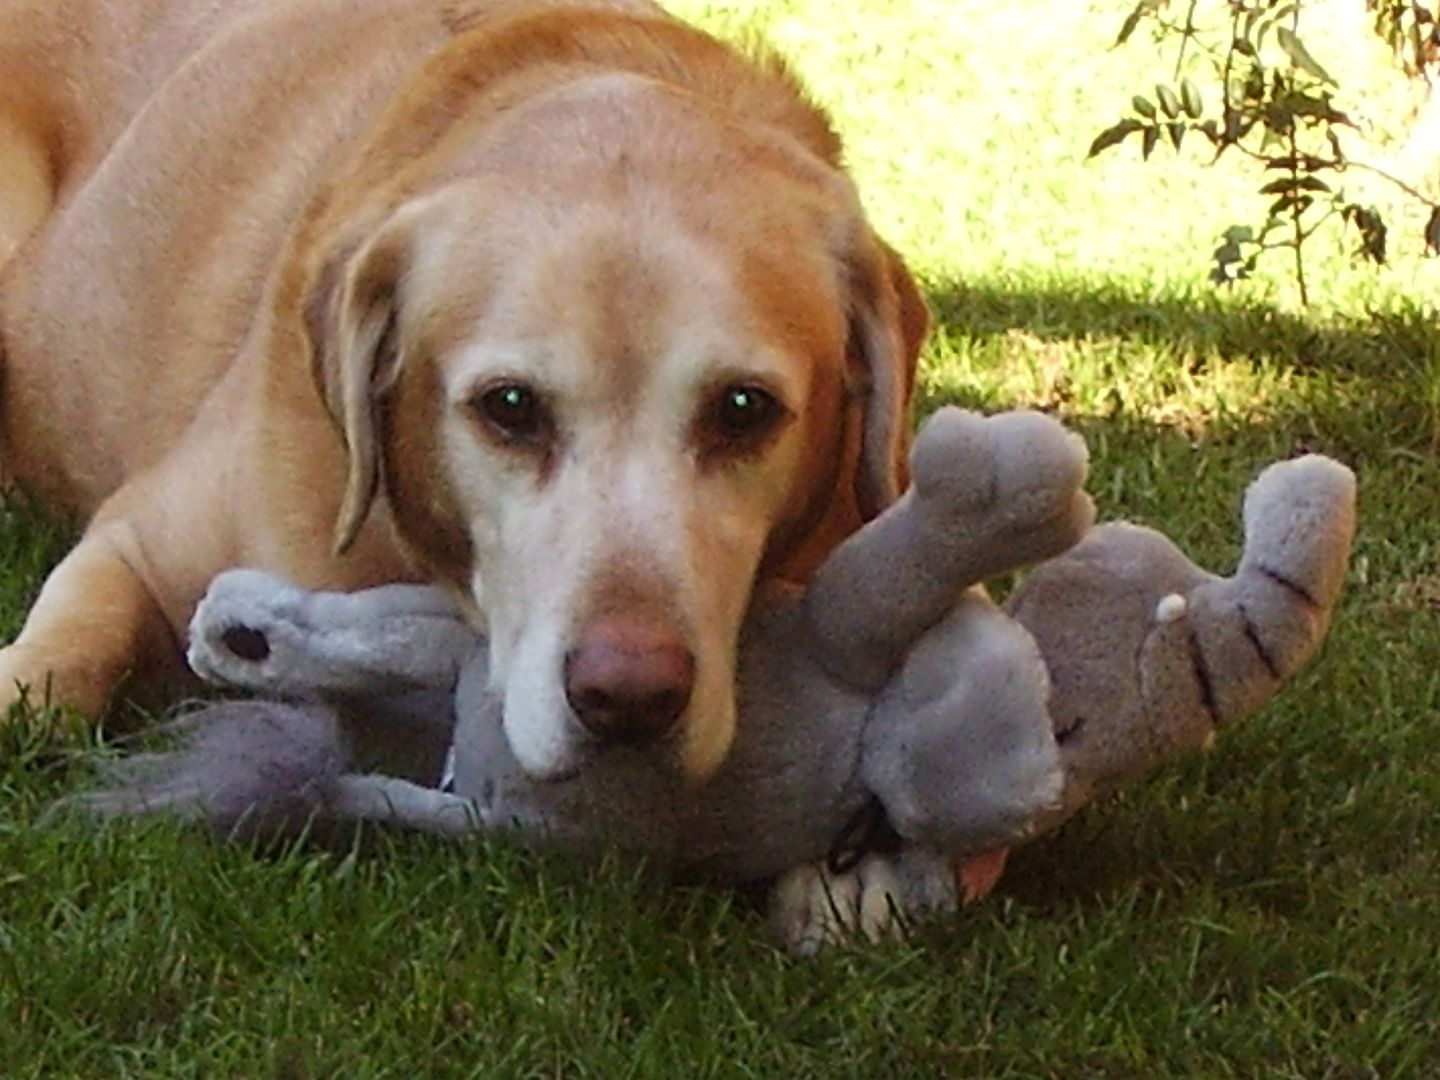 Sam decided he liked Sloans elephant and he stole it.  Does he look guilty?